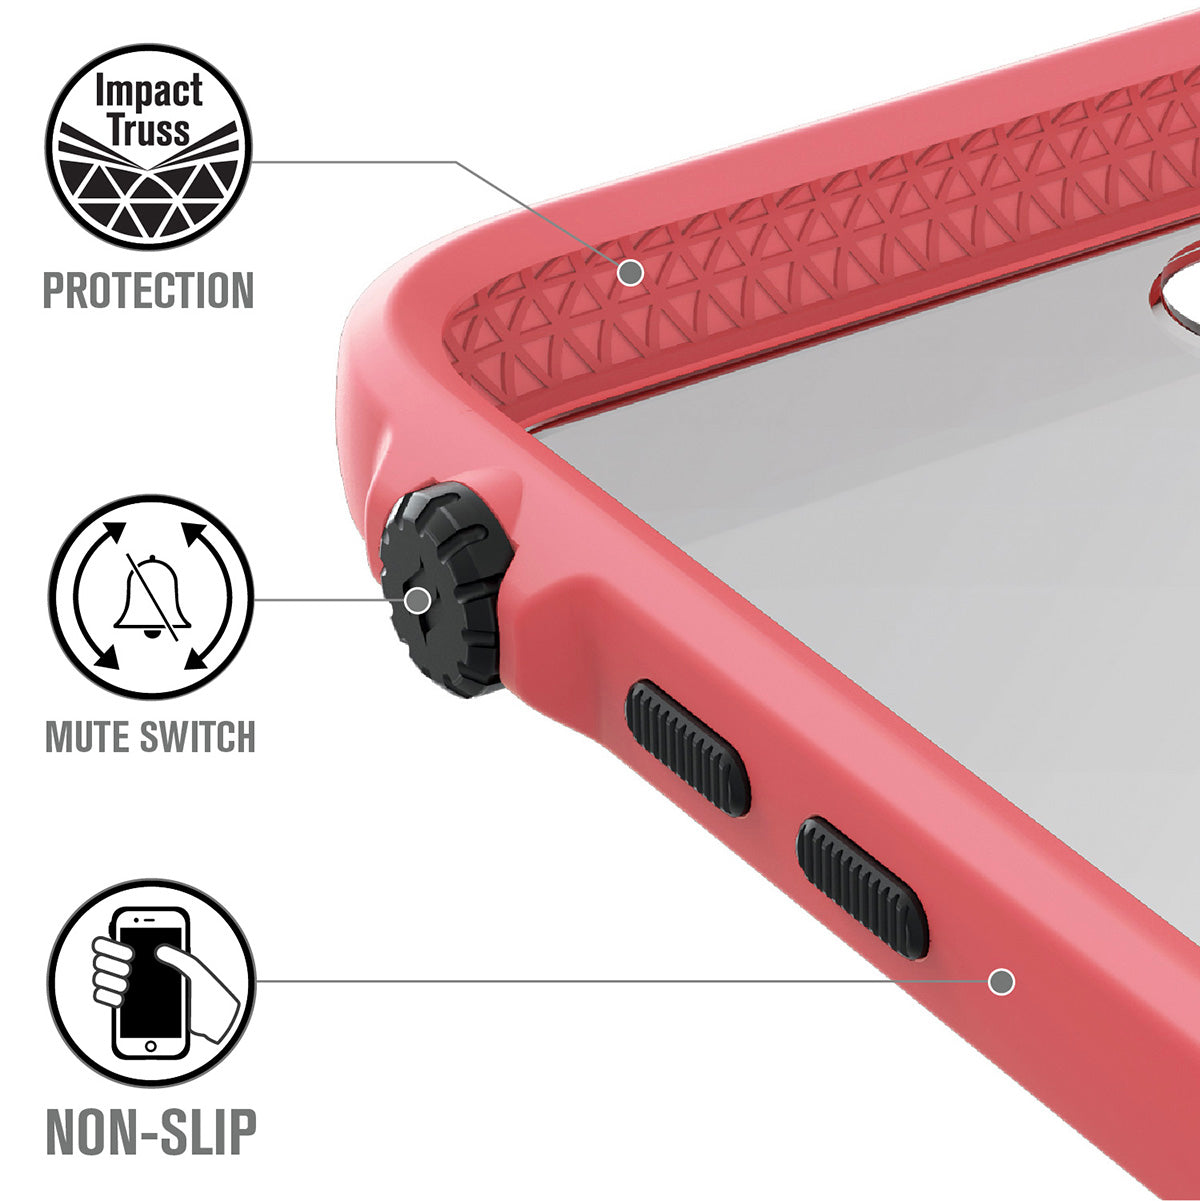 Catalyst Impact Protection Case for iPhone 8 Plus and 7 Plus showing the interior of the case text reads impact truss protection mute switch non slip